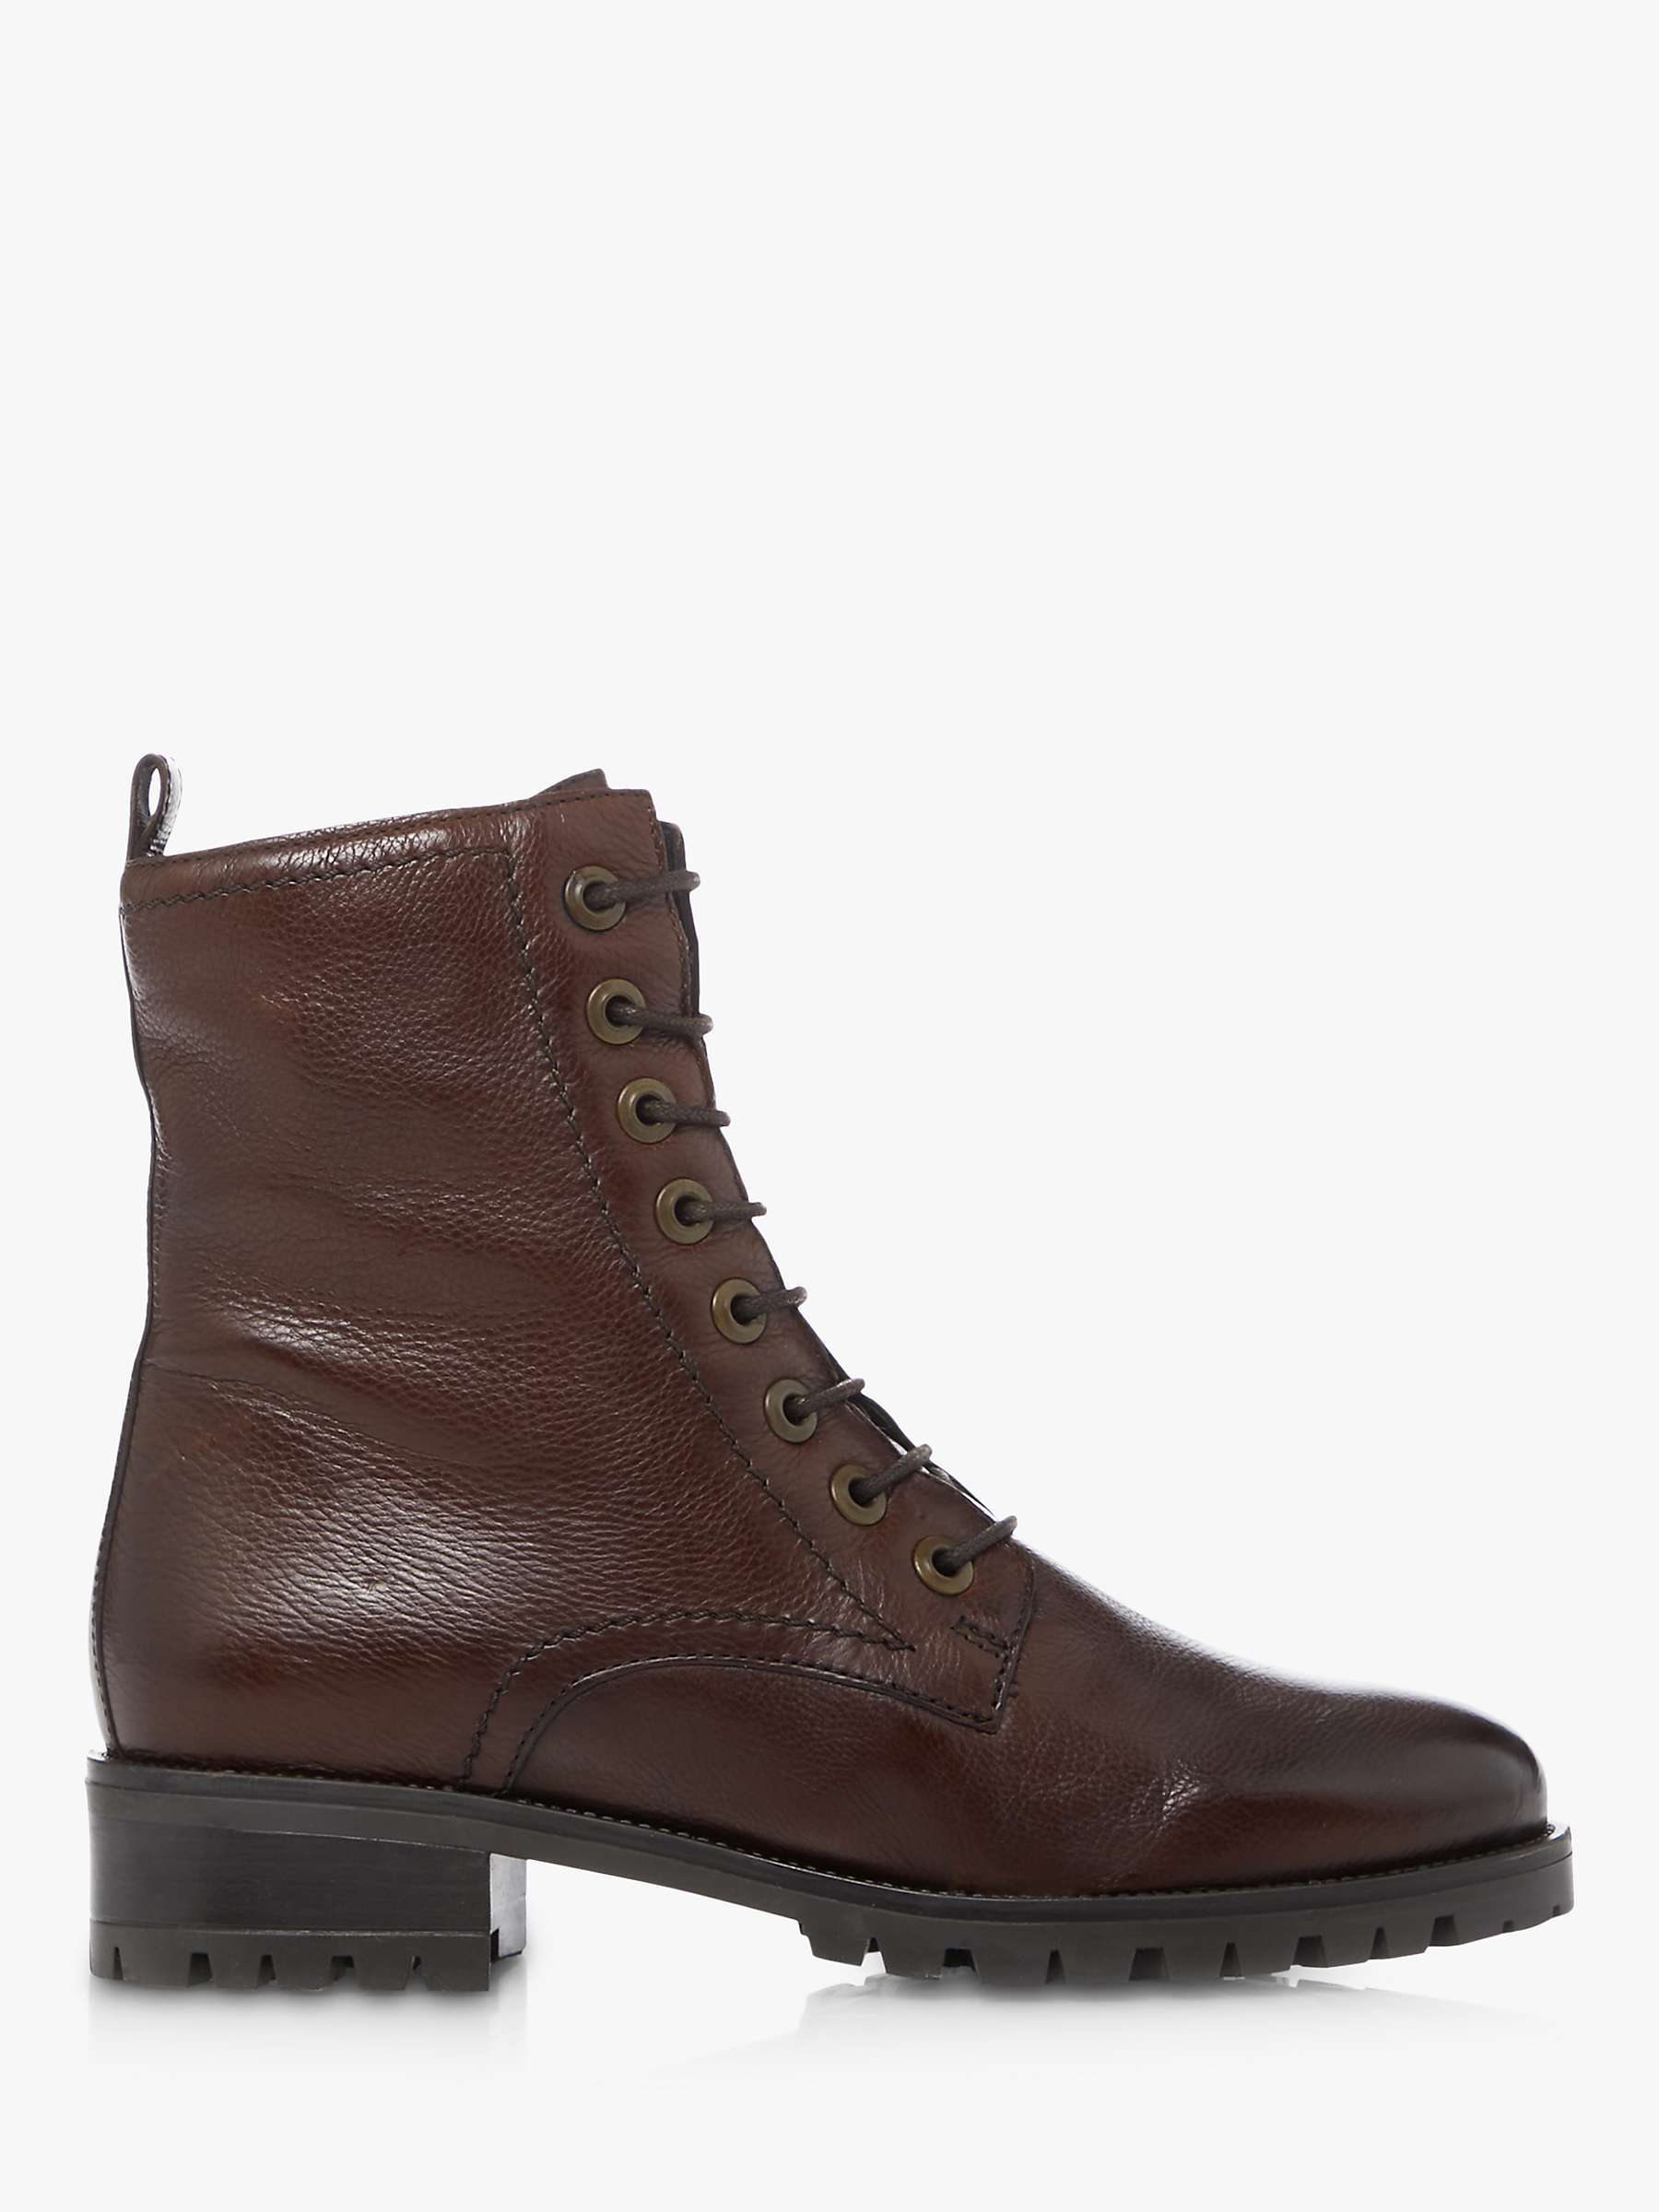 Buy Dune Prestone Leather Cleated Sole Lace-Up Hiker Boots, Brown Online at johnlewis.com